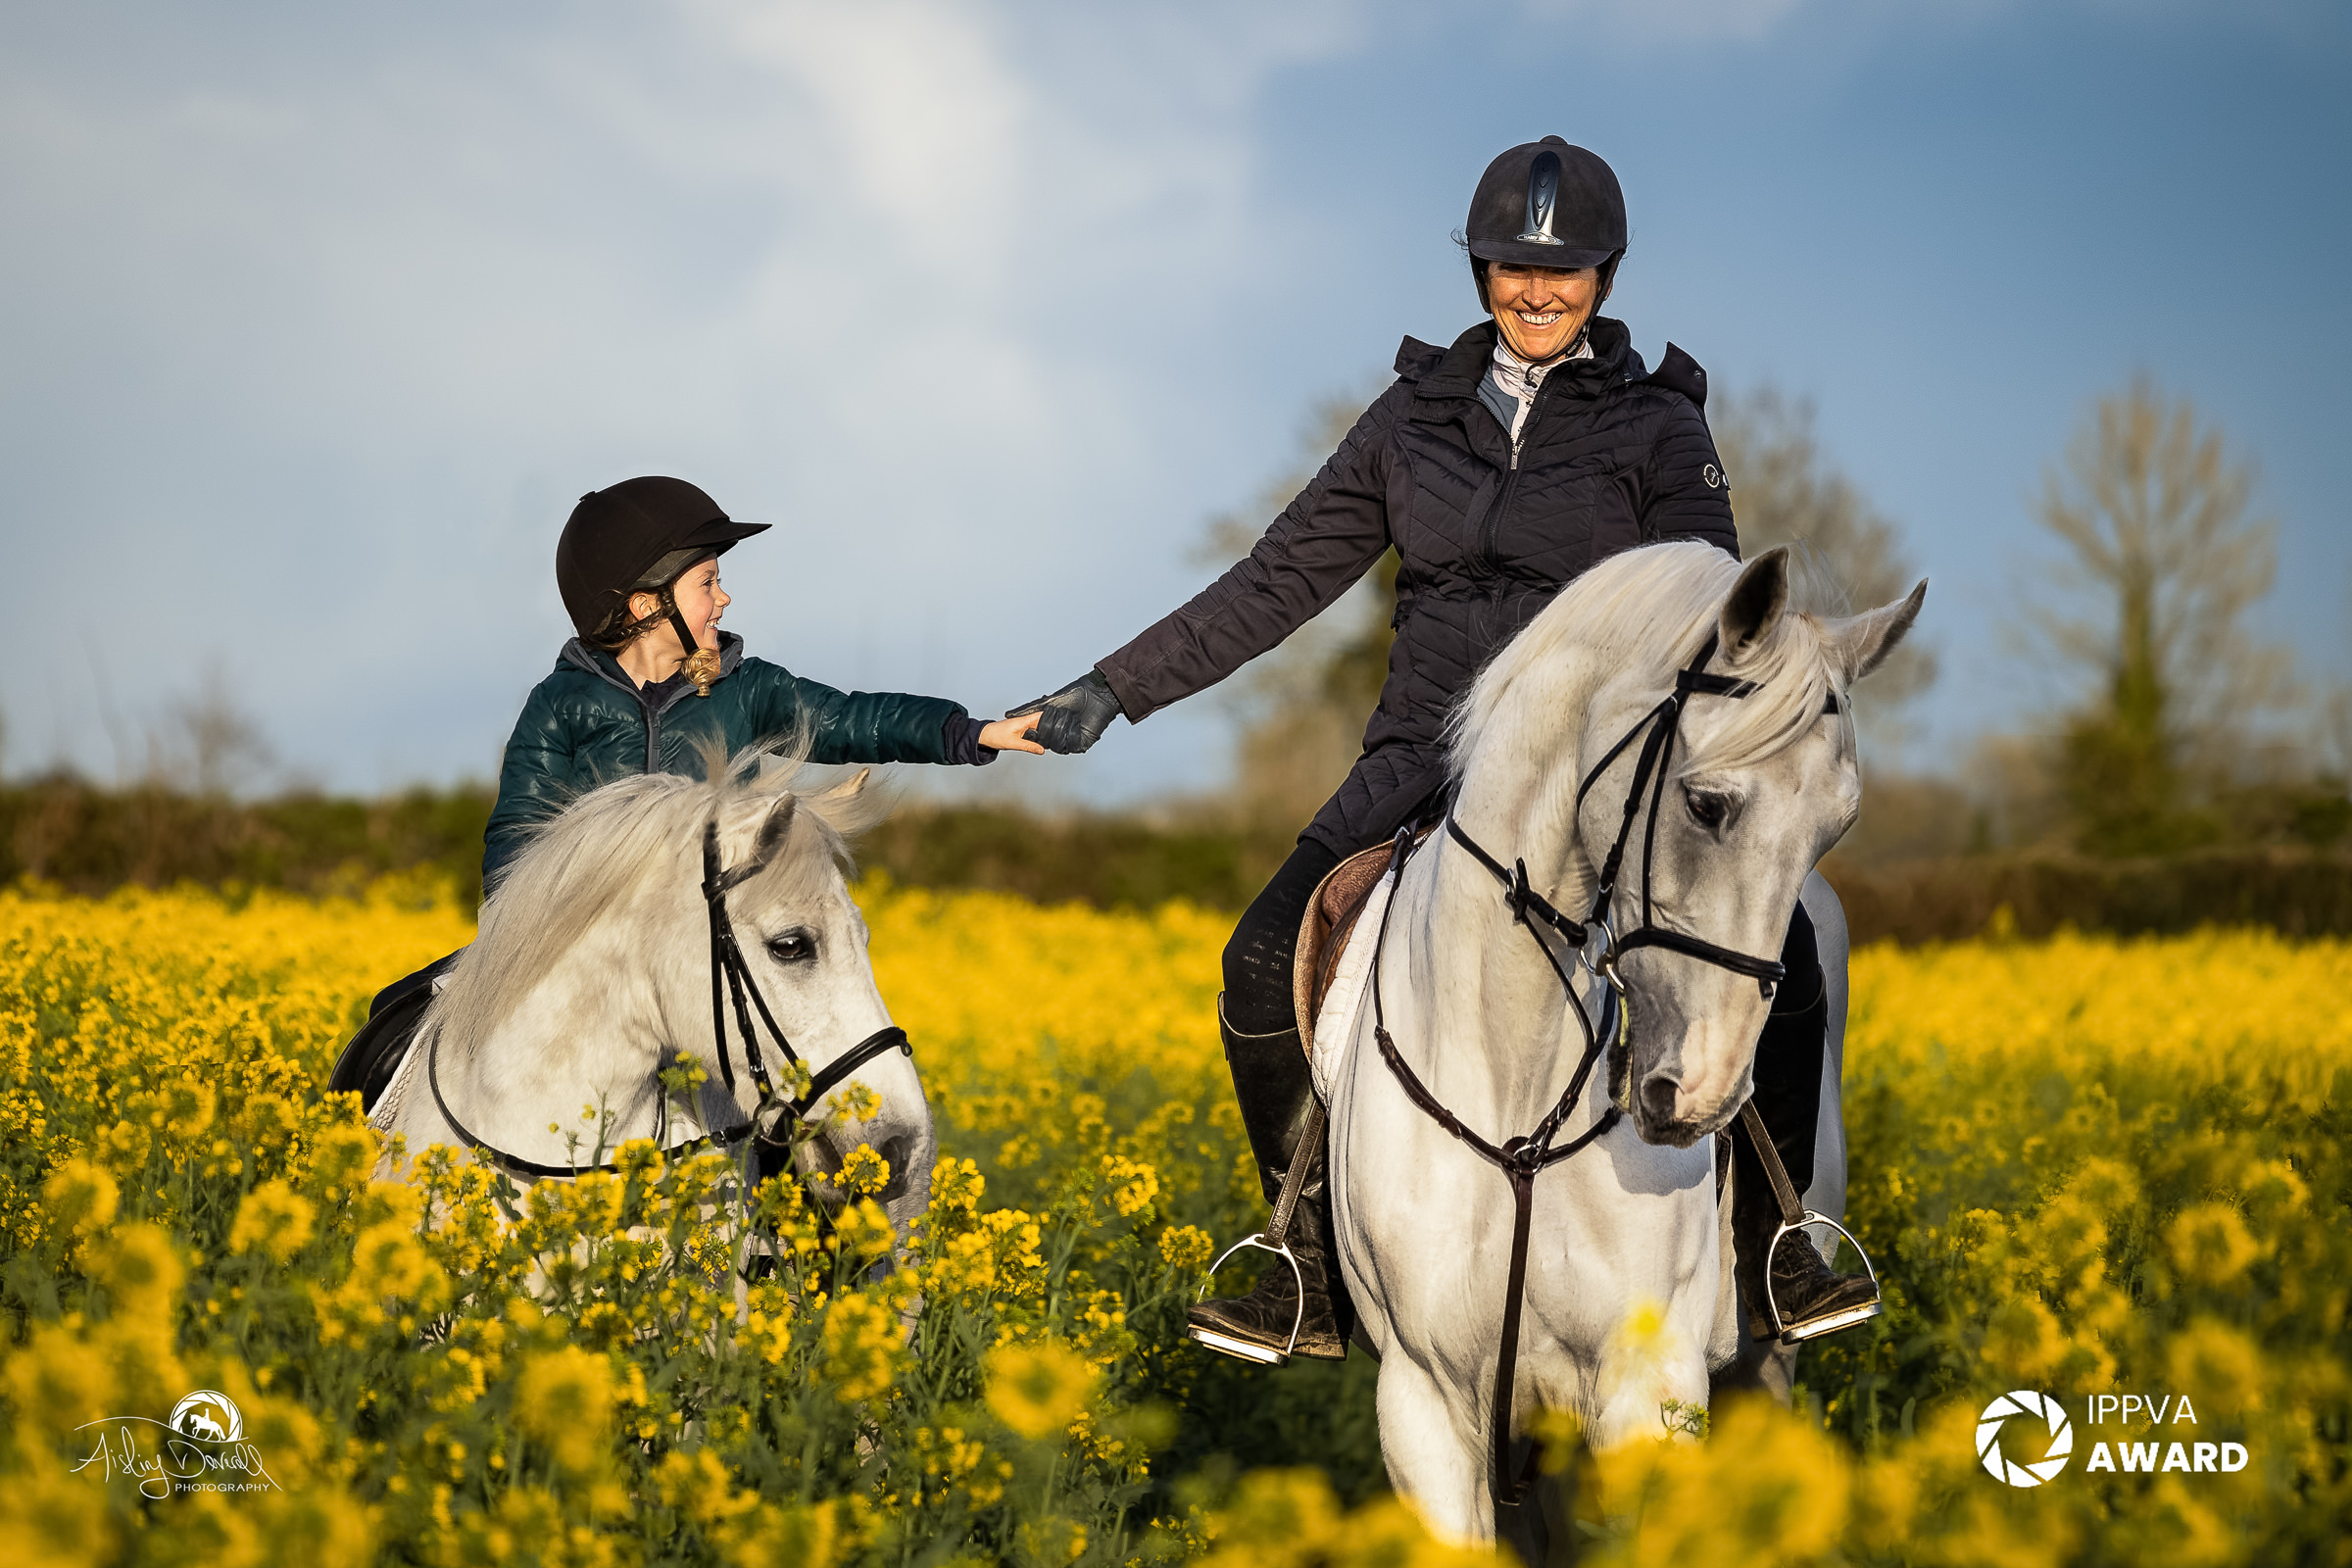 award winning portrait of a mother and daughter on horses in a field of flowers